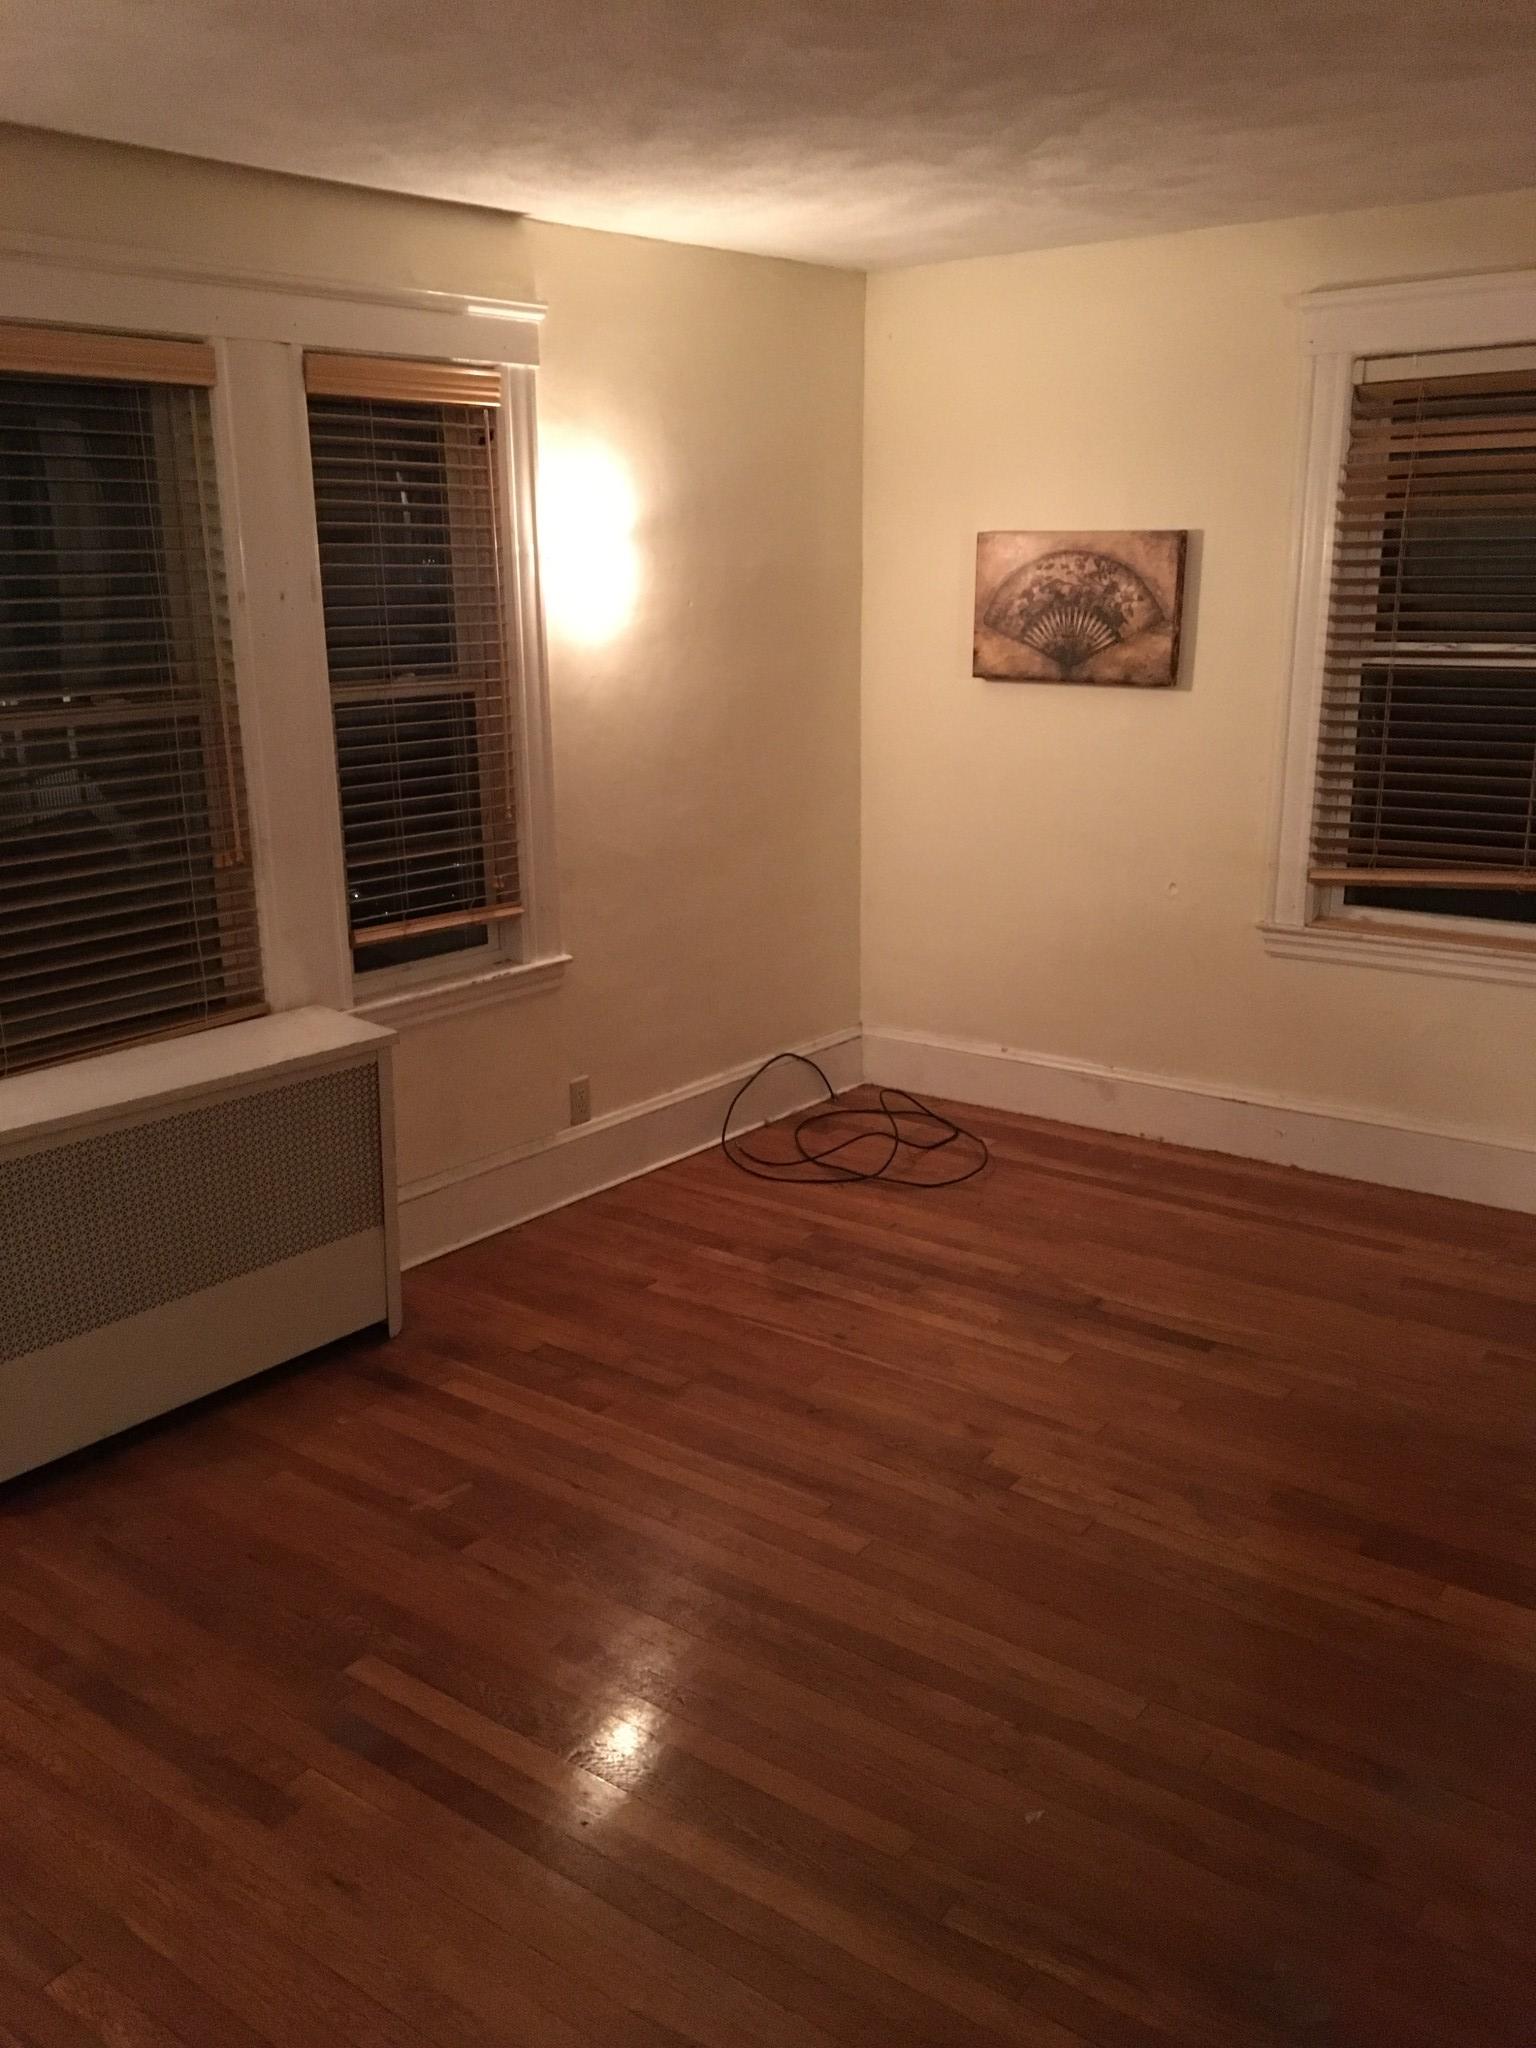 Photos of apartment on Tremont St.,Malden MA 02148